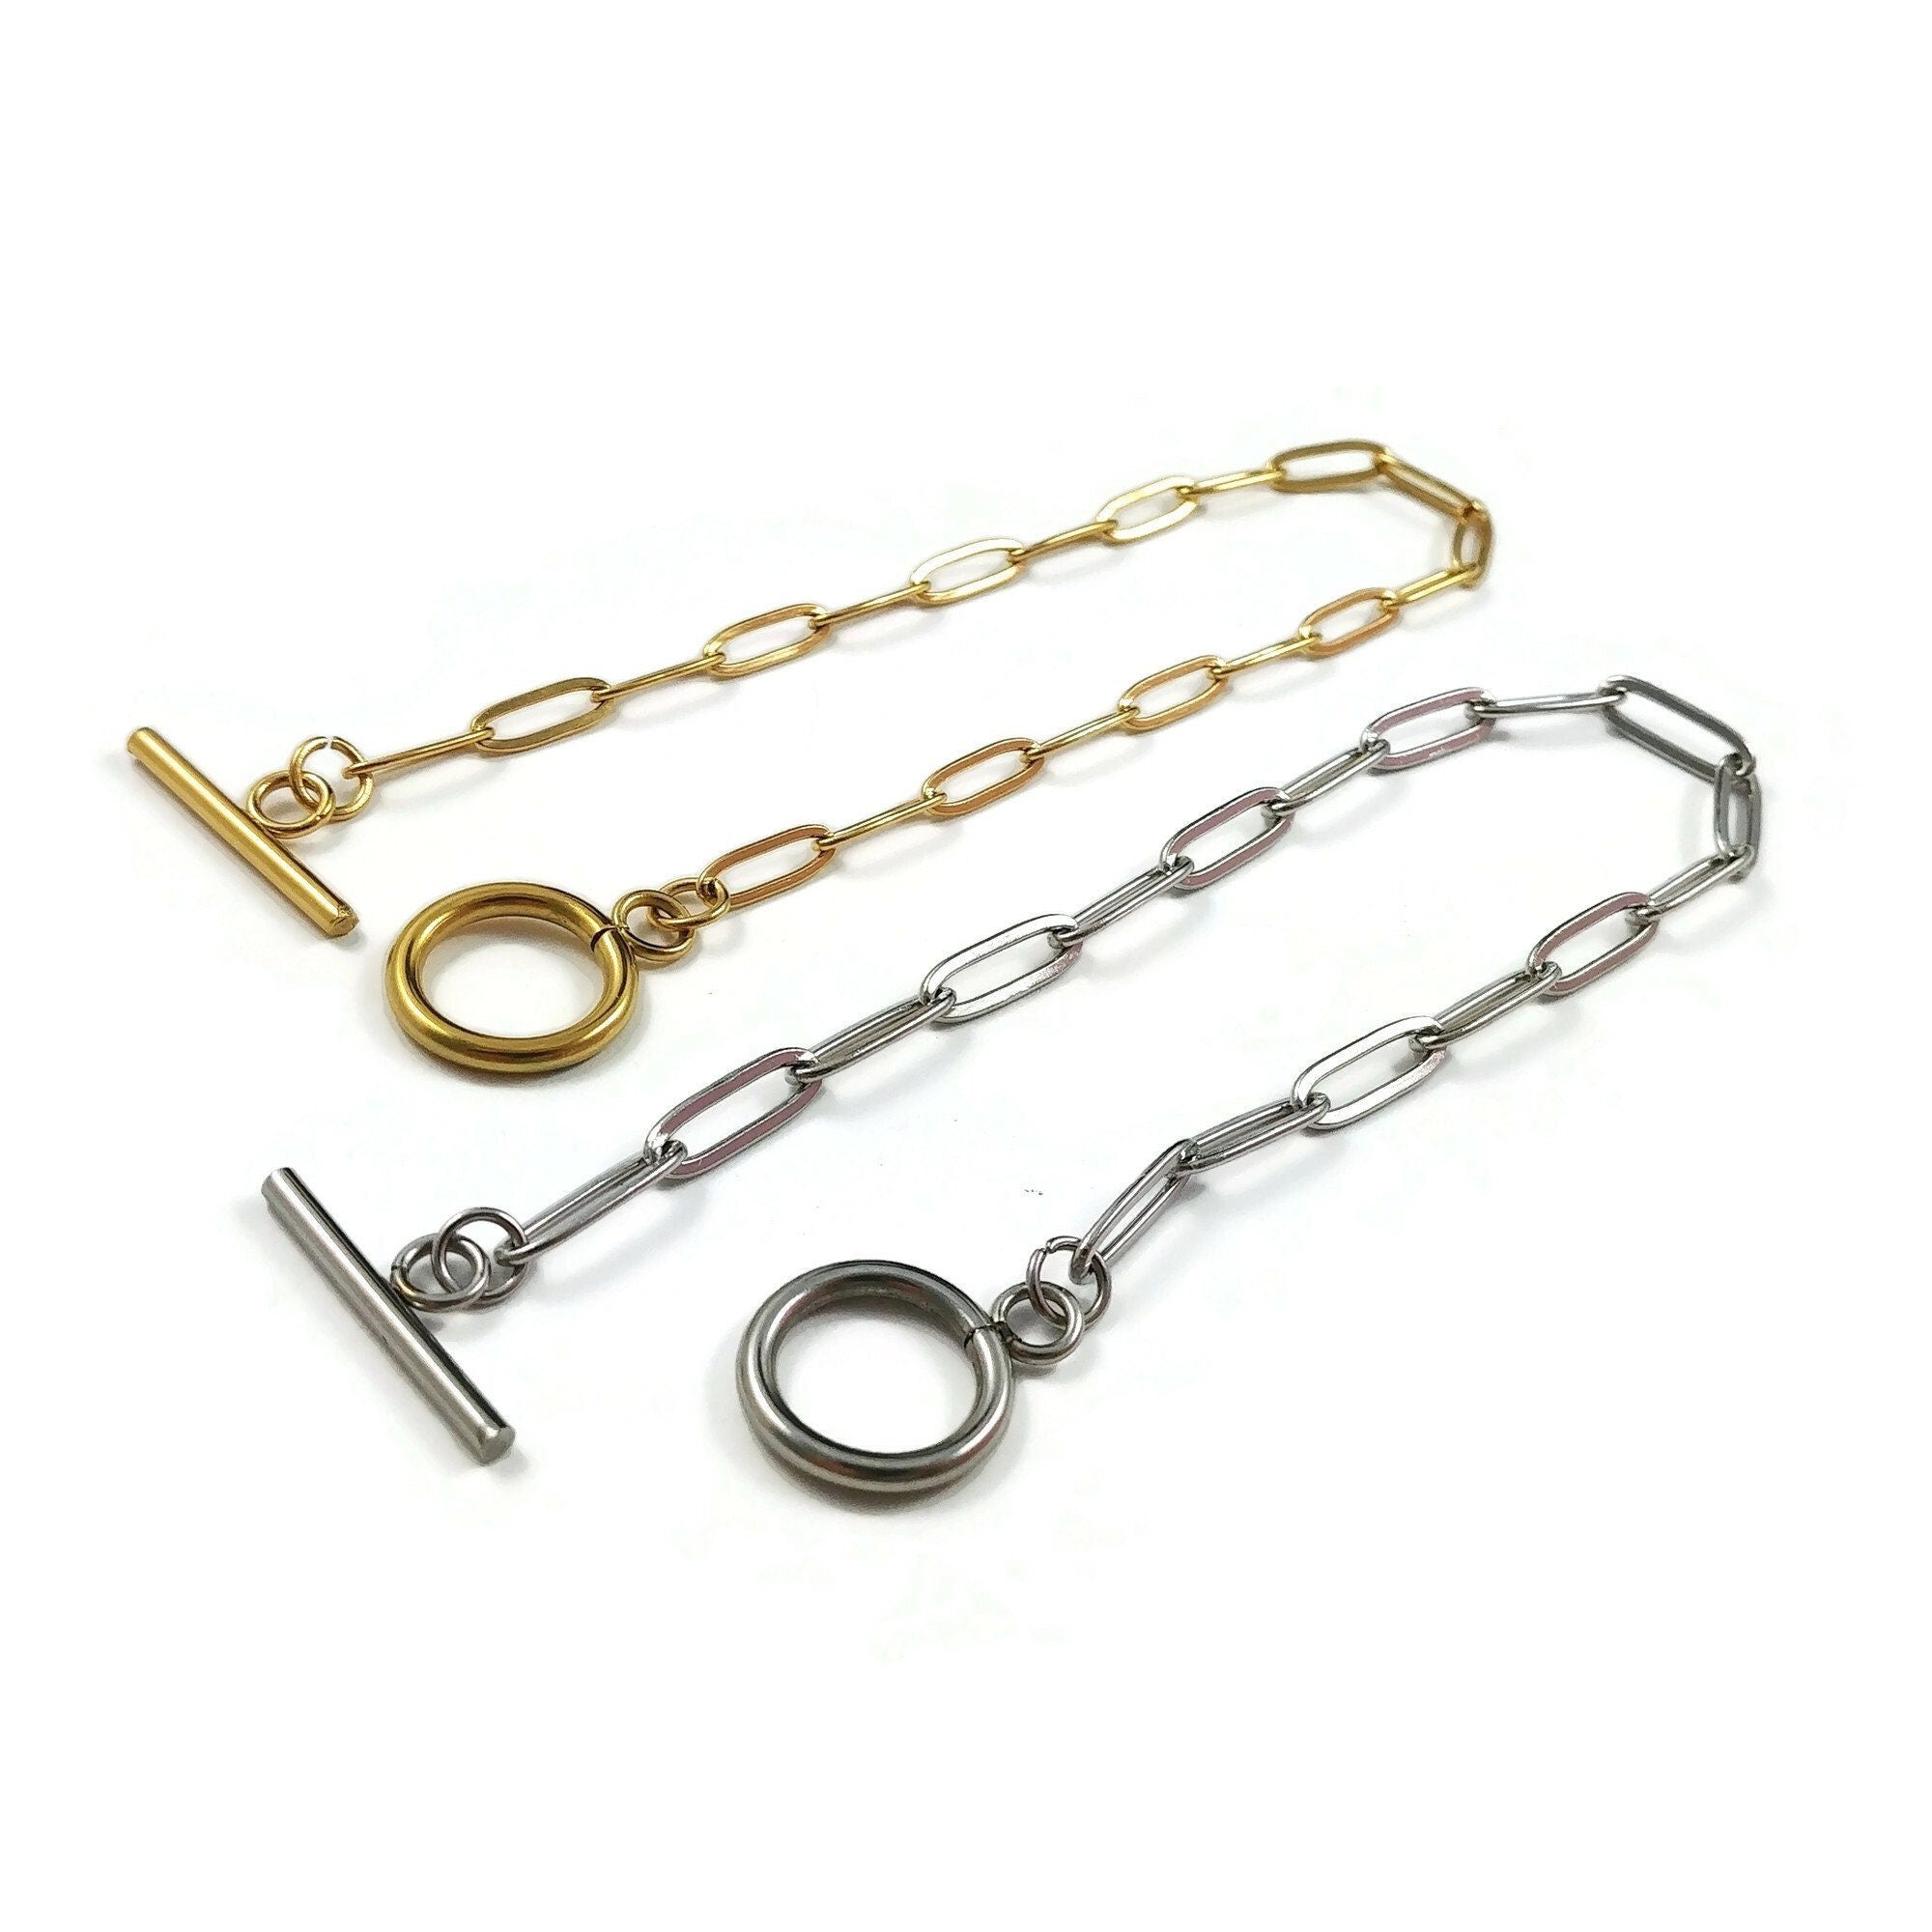 Necklaces Stainless Steel 2 Chain Extender Enc0013 Stainless / 4mm Wholesale Jewelry Website Stainless Unisex